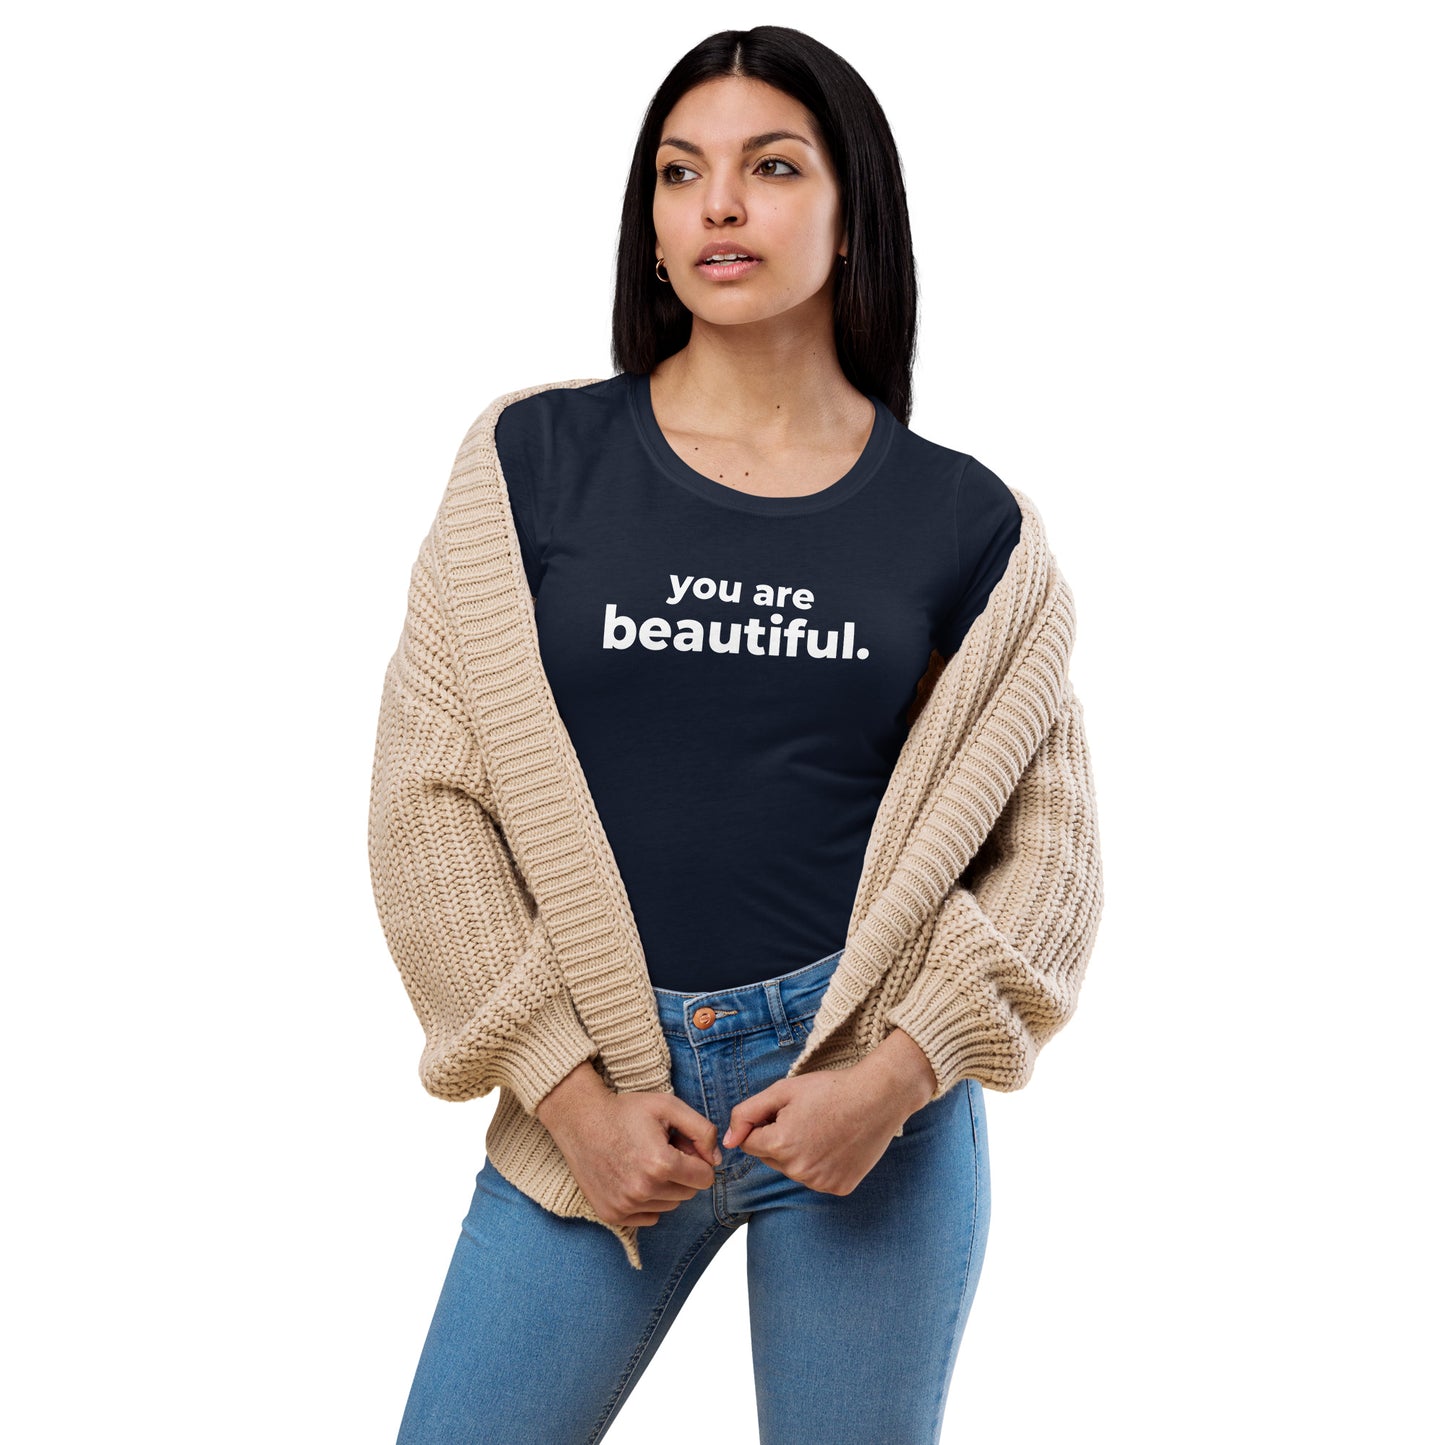 You are Beautiful - Women’s fitted t-shirt